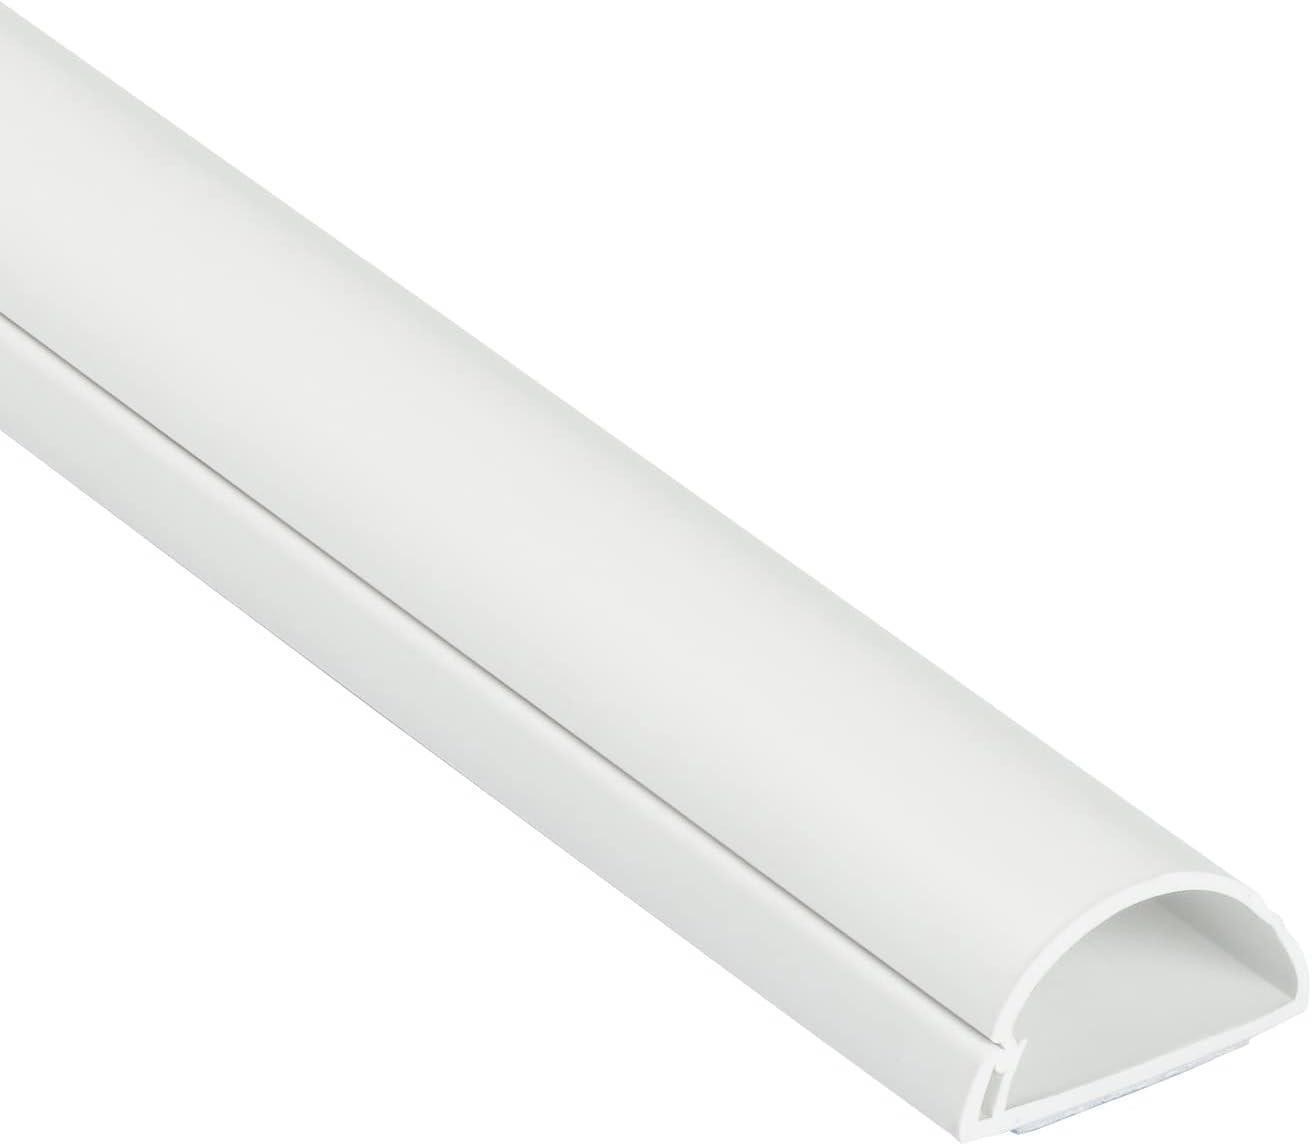 D-Line Cord Cover, 30mmx15mm, White